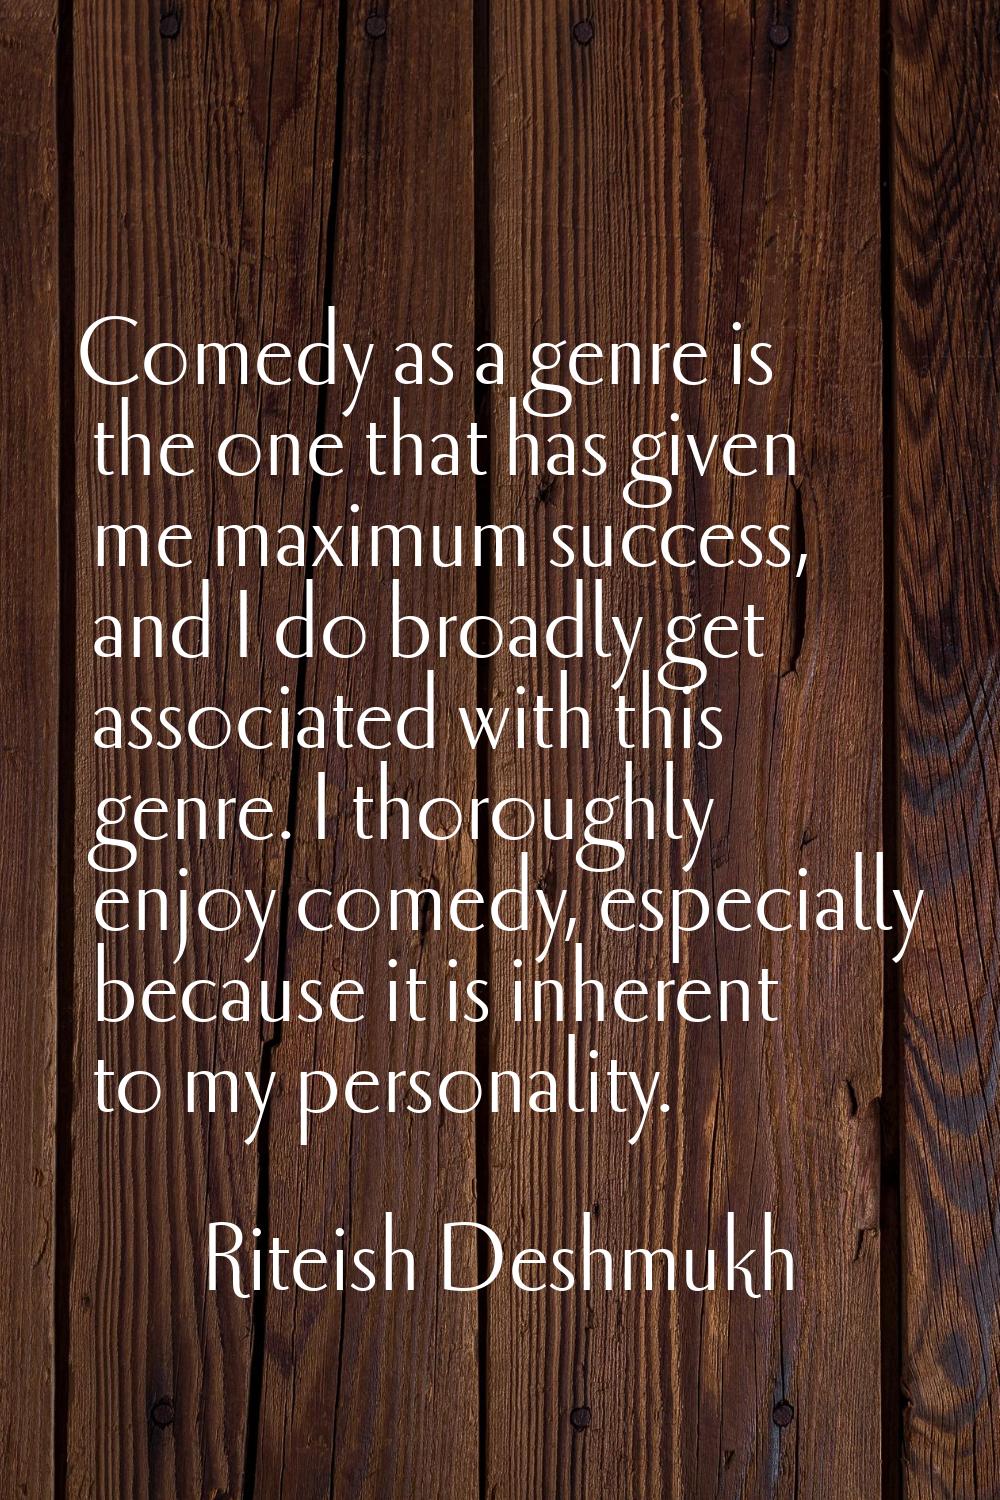 Comedy as a genre is the one that has given me maximum success, and I do broadly get associated wit